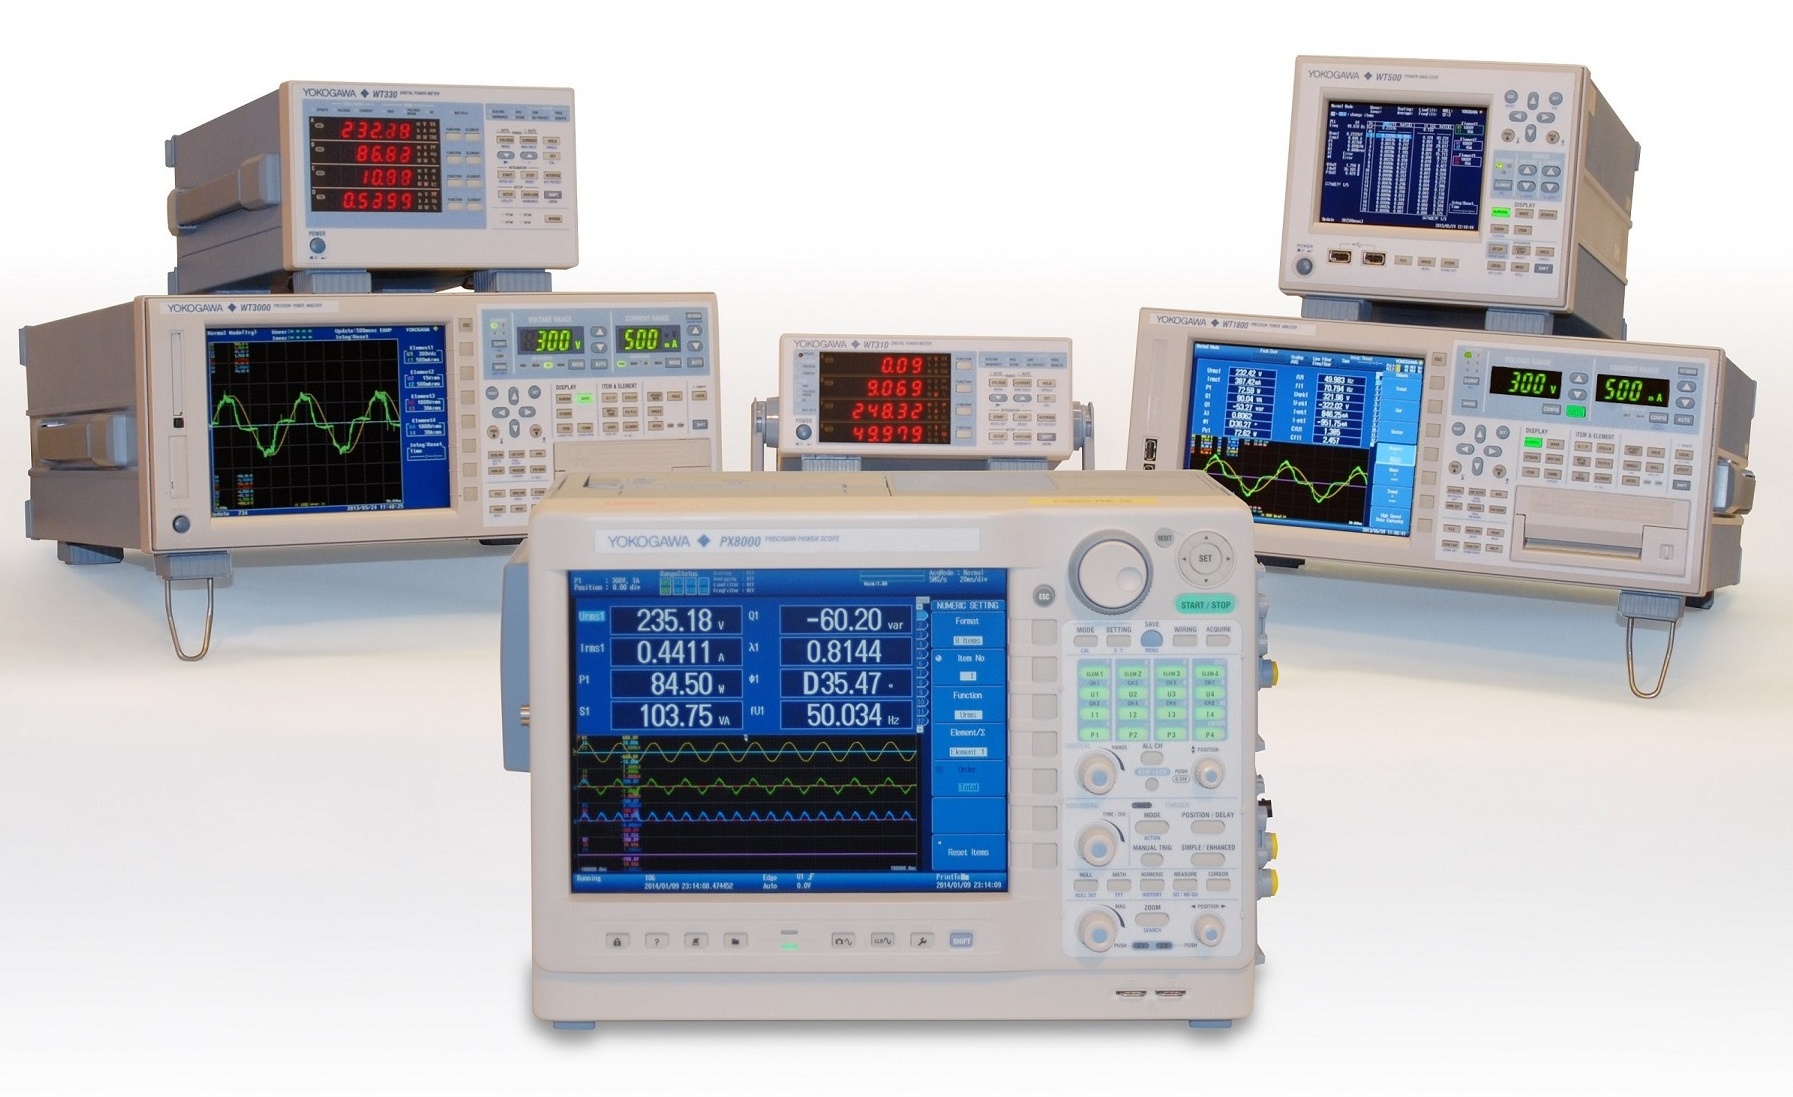 Figure 2: The Precision Power Scope is part of Yokogawa’s power meters and analysers range